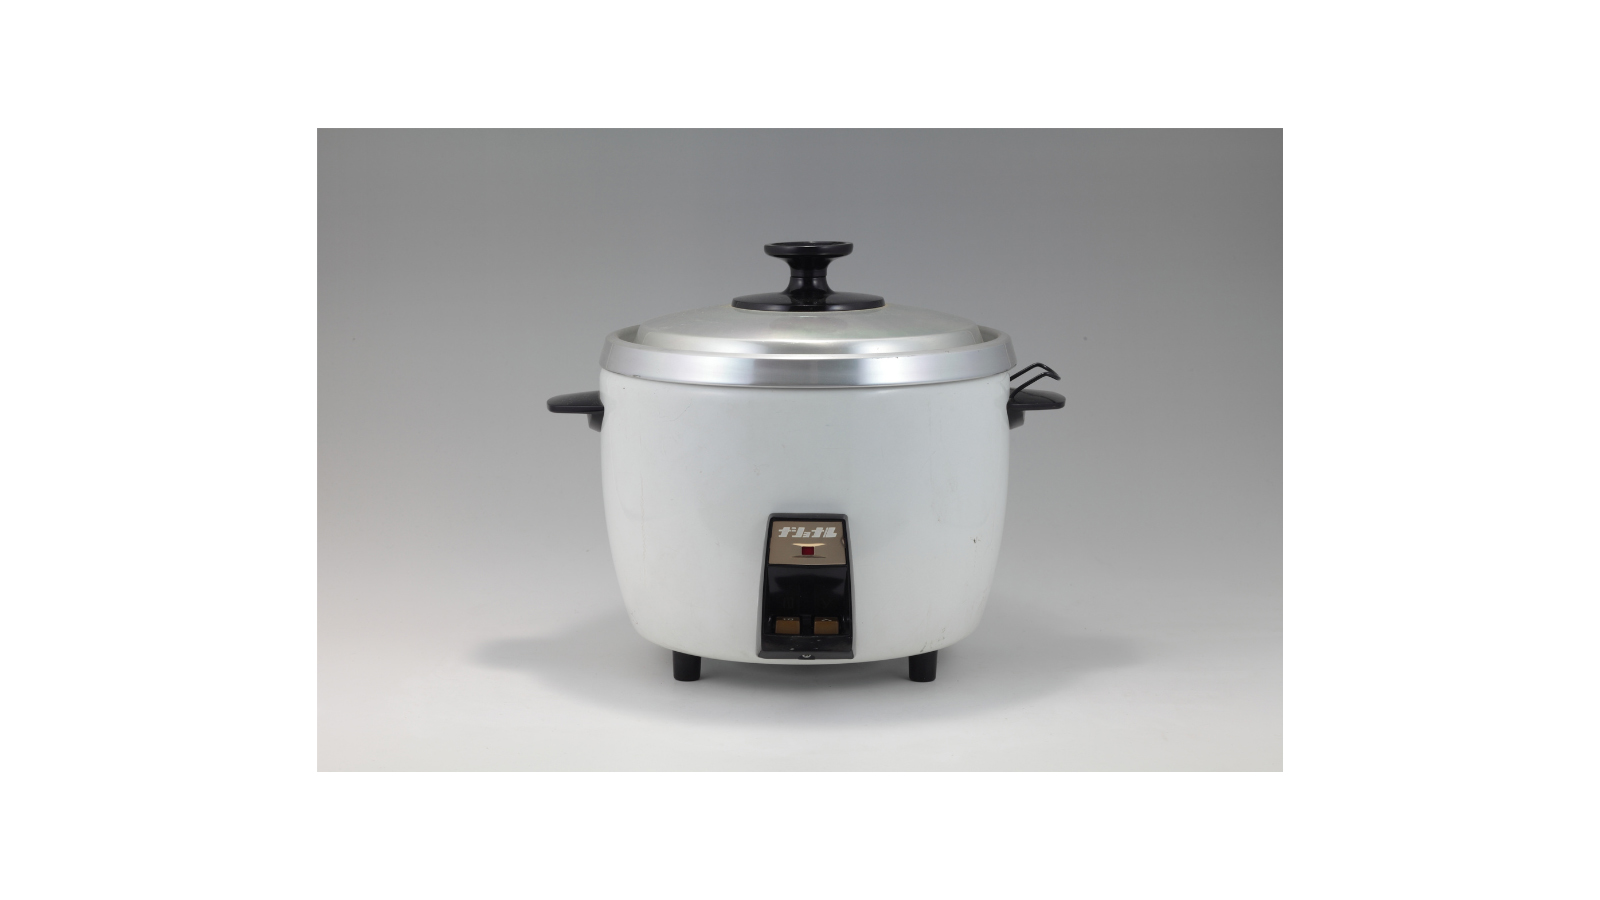 Photo: The first automatic electric rice cooker (SR-15)